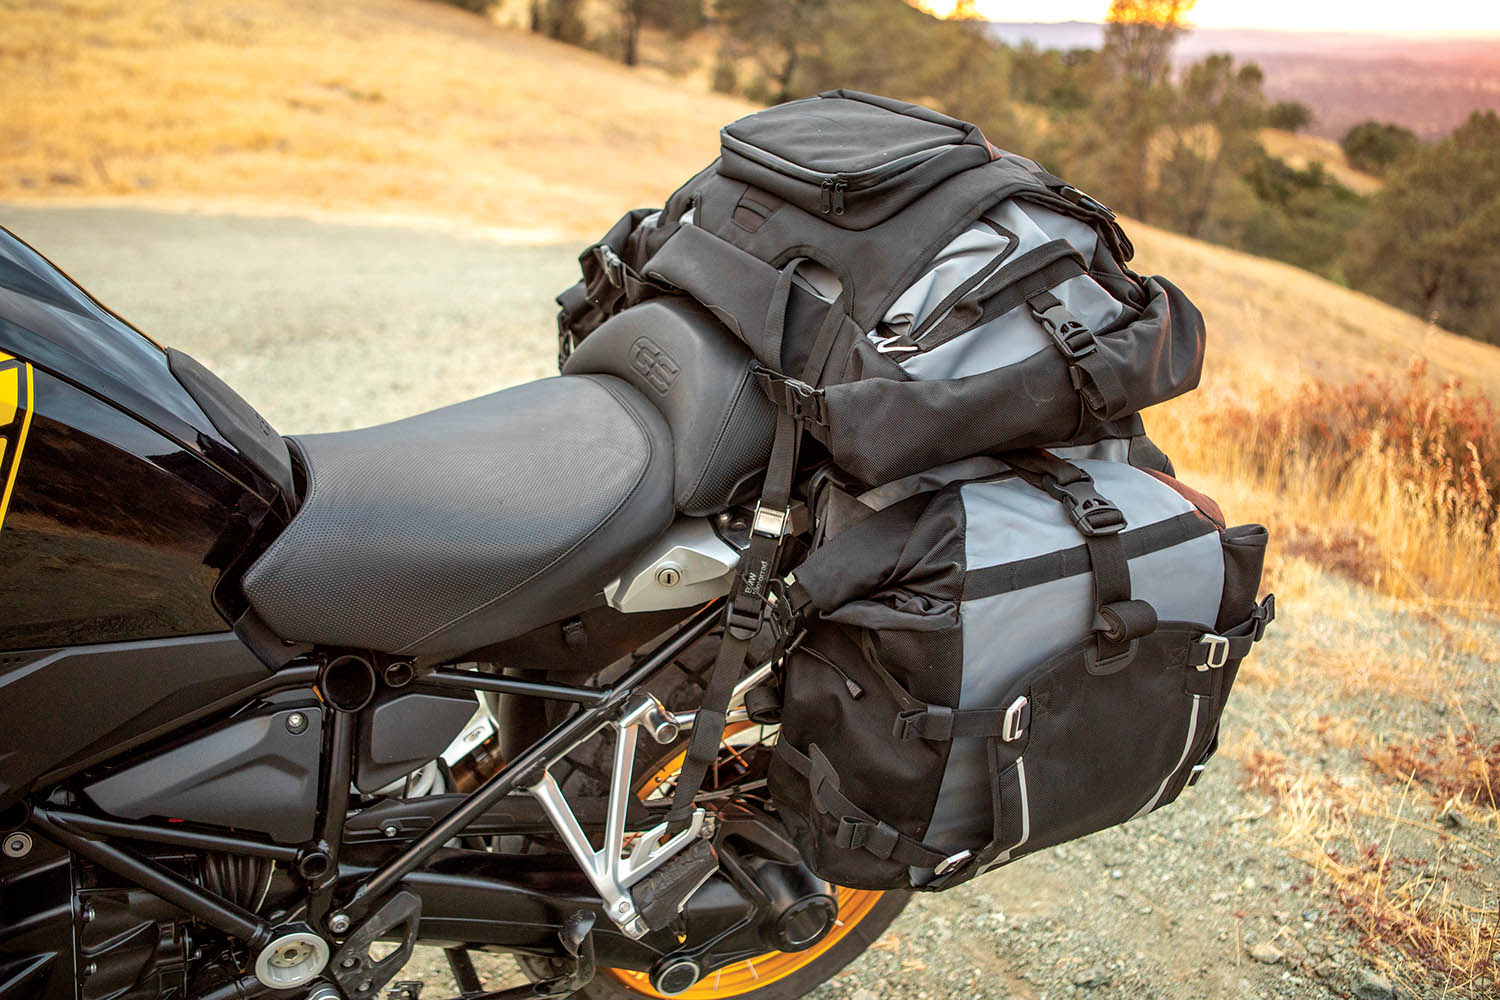 REVIEW: Farewell to the BMW R 1250 GS